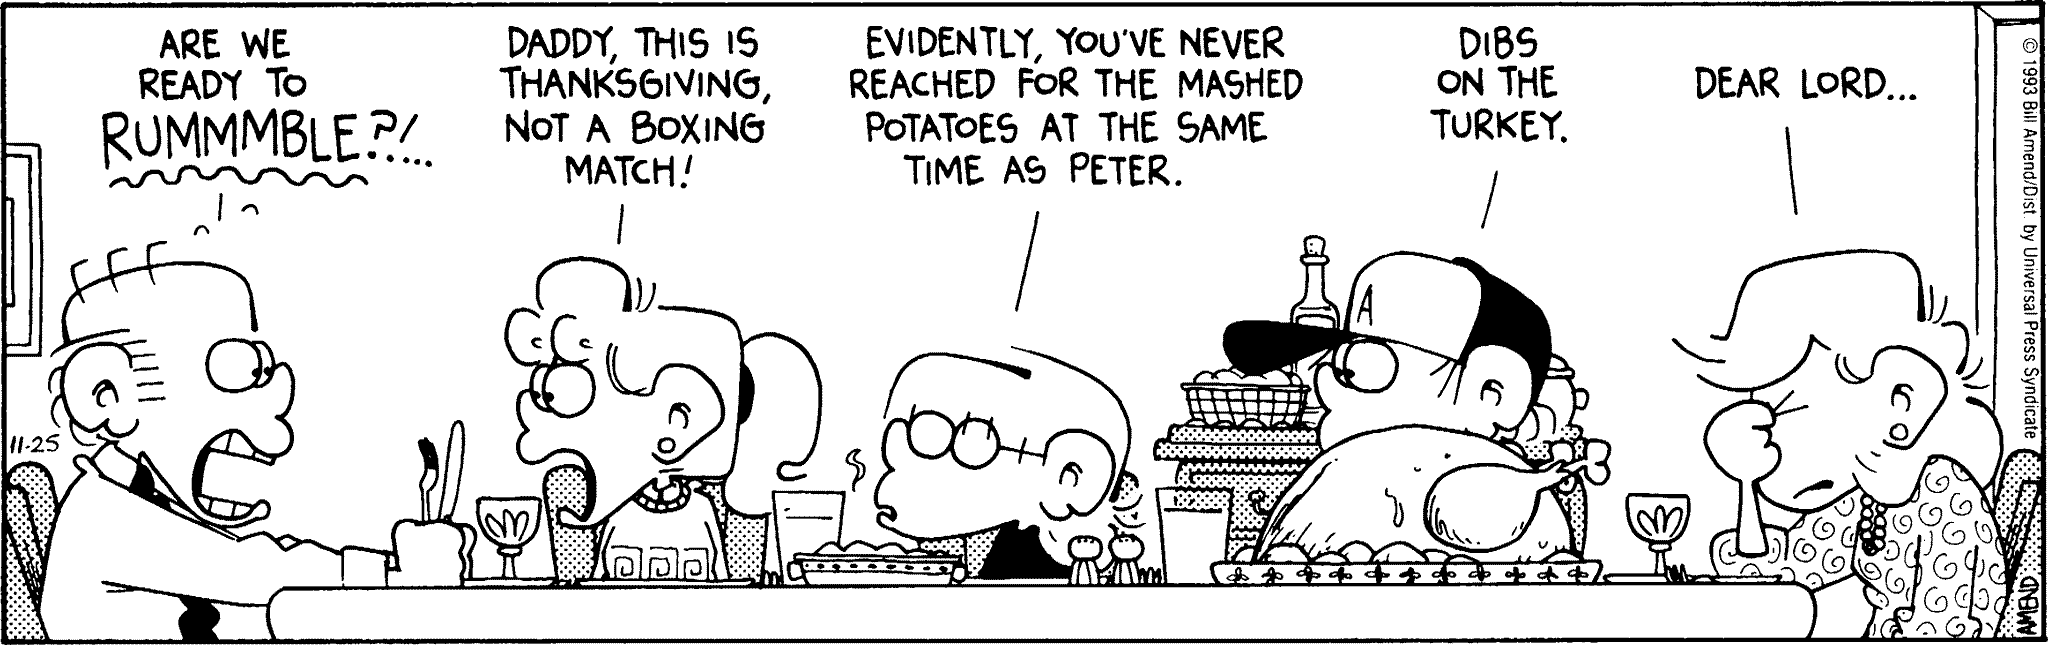 Thanksgiving Comics - FoxTrot comic strip by Bill Amend - Published November 25, 1993 - Transcript: Roger: Are we ready to RUMMMMBLE?!..... Paige: Daddy, this is Thanksgiving, not a boxing match! Jason: Evidently, you've never reached for the mashed potatoes at the same time as Peter. Peter: Dibs on the turkey. Andy: Dear Lord...